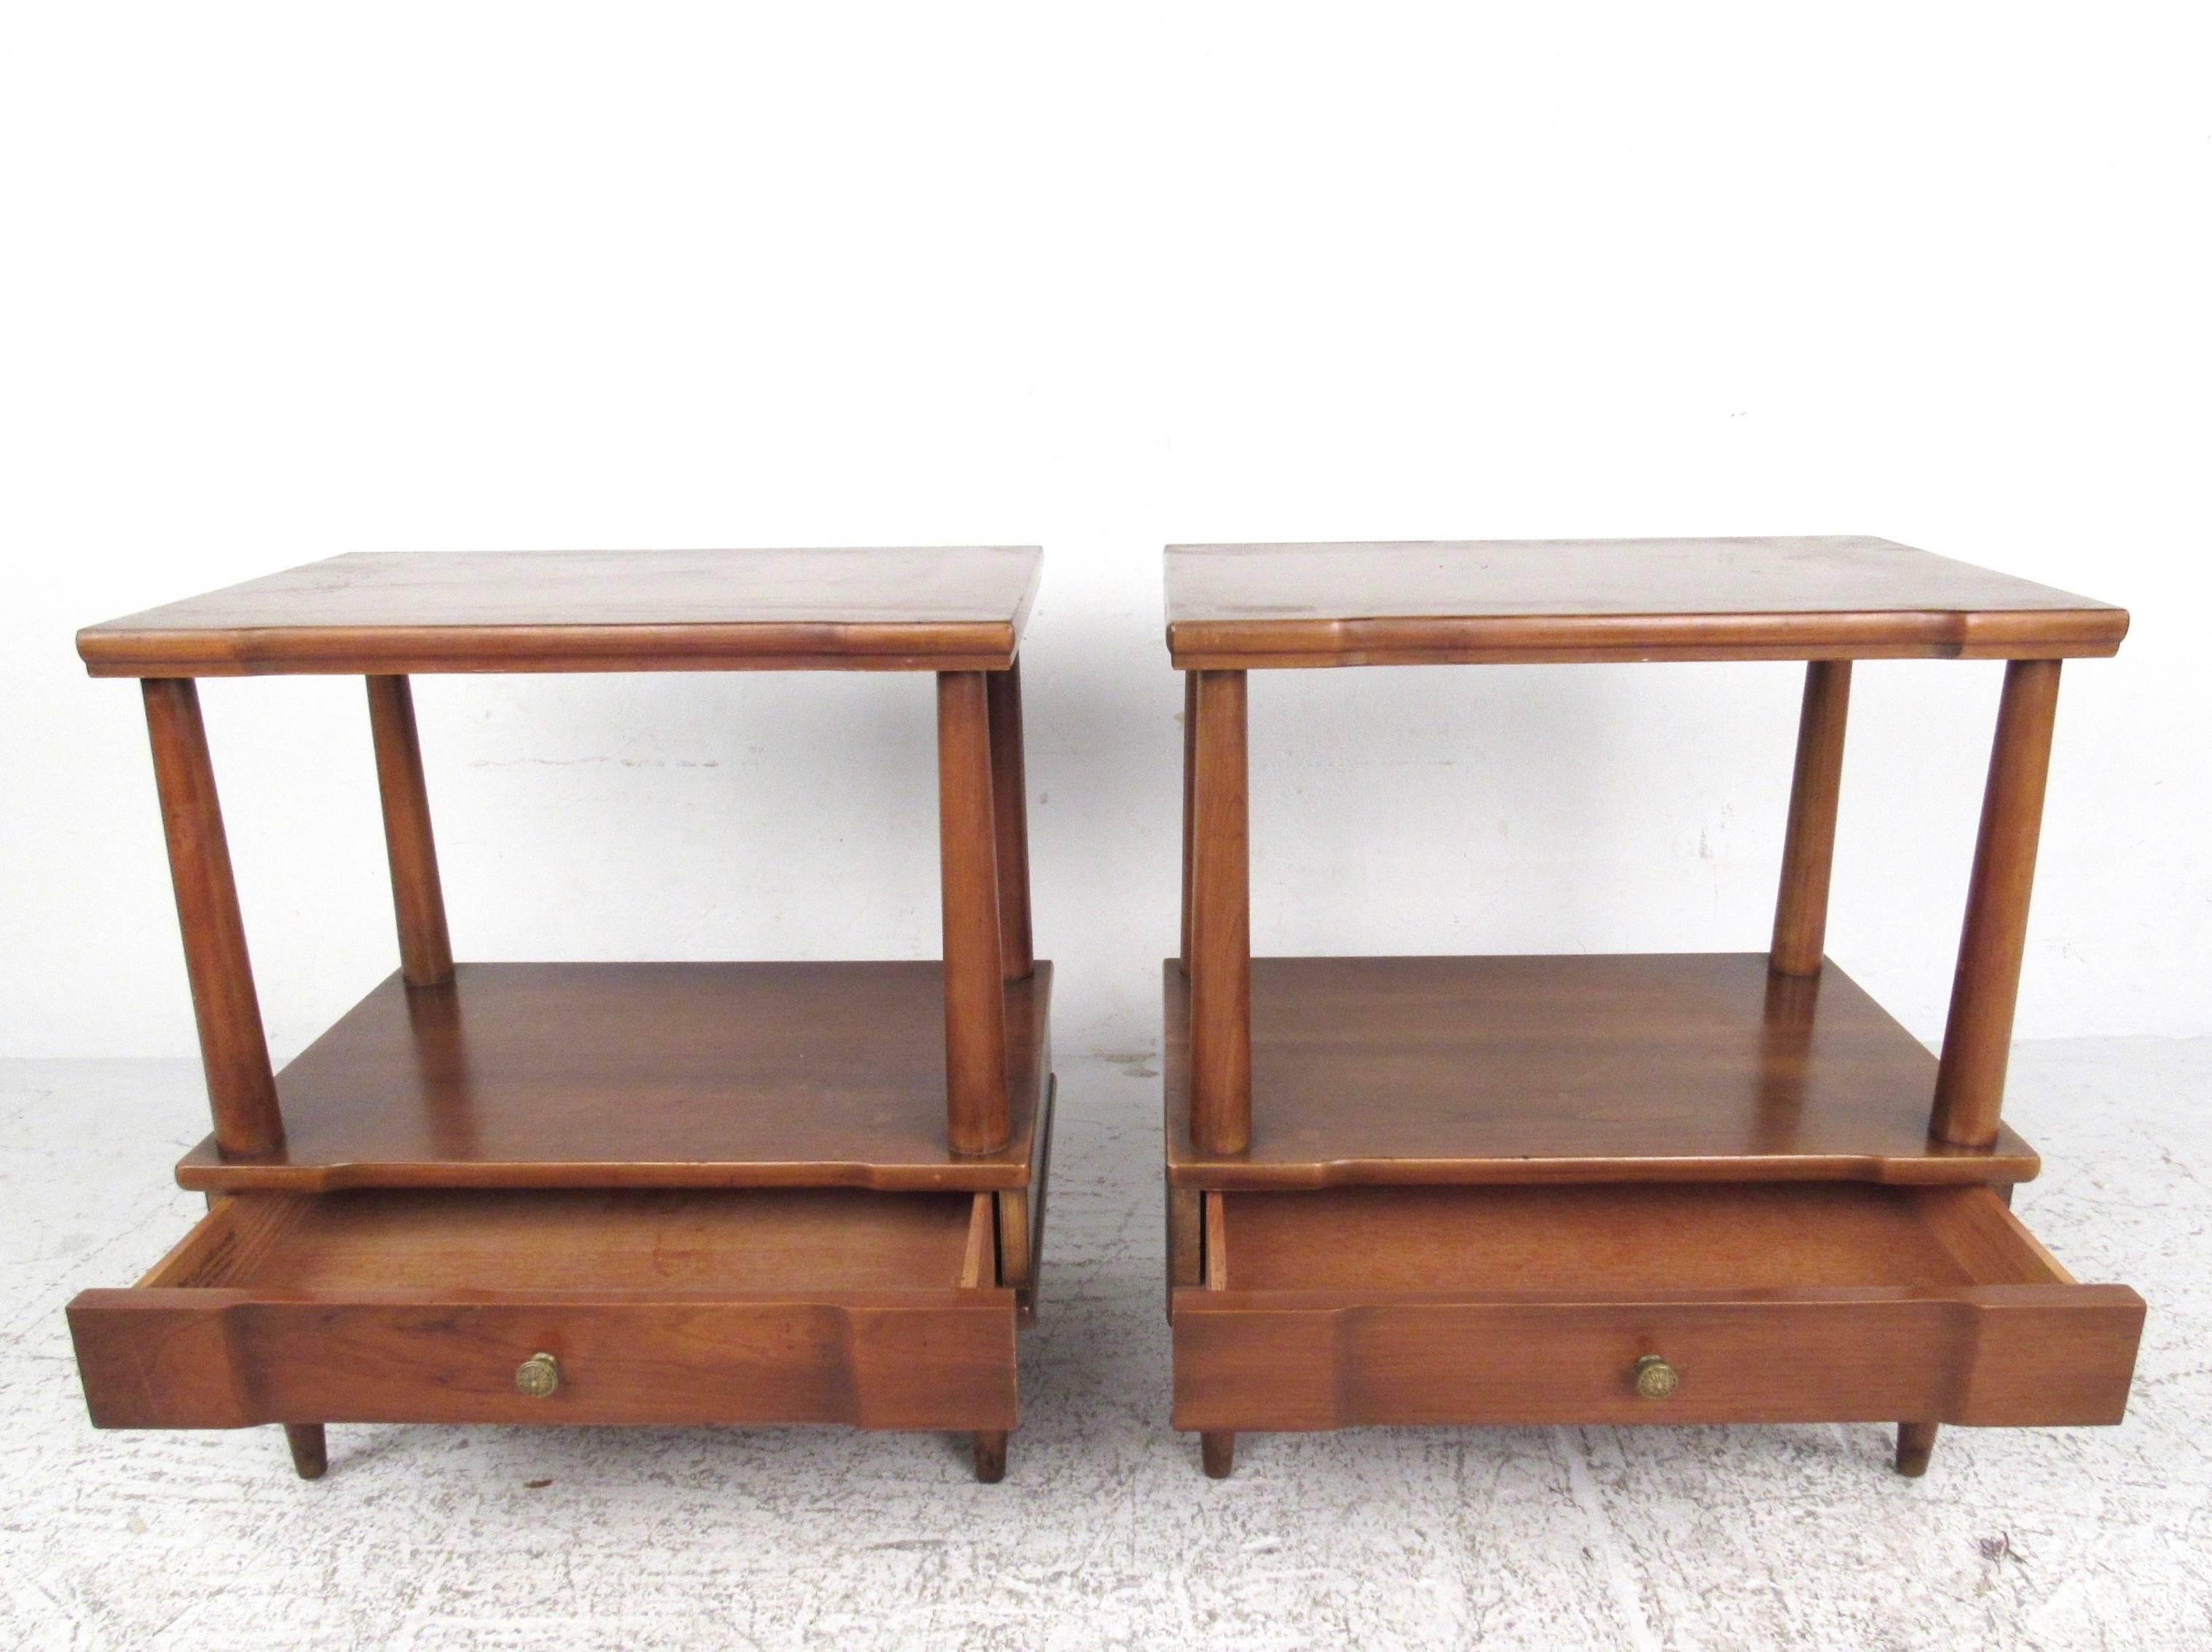 Pair of stunning vintage walnut end tables features tapered spindle frames with lower level drawer. Spacious two tier design makes these an excellent choice for bedside tables, lamp tables, or sofa end tables. Original John Widdicomb stamp in